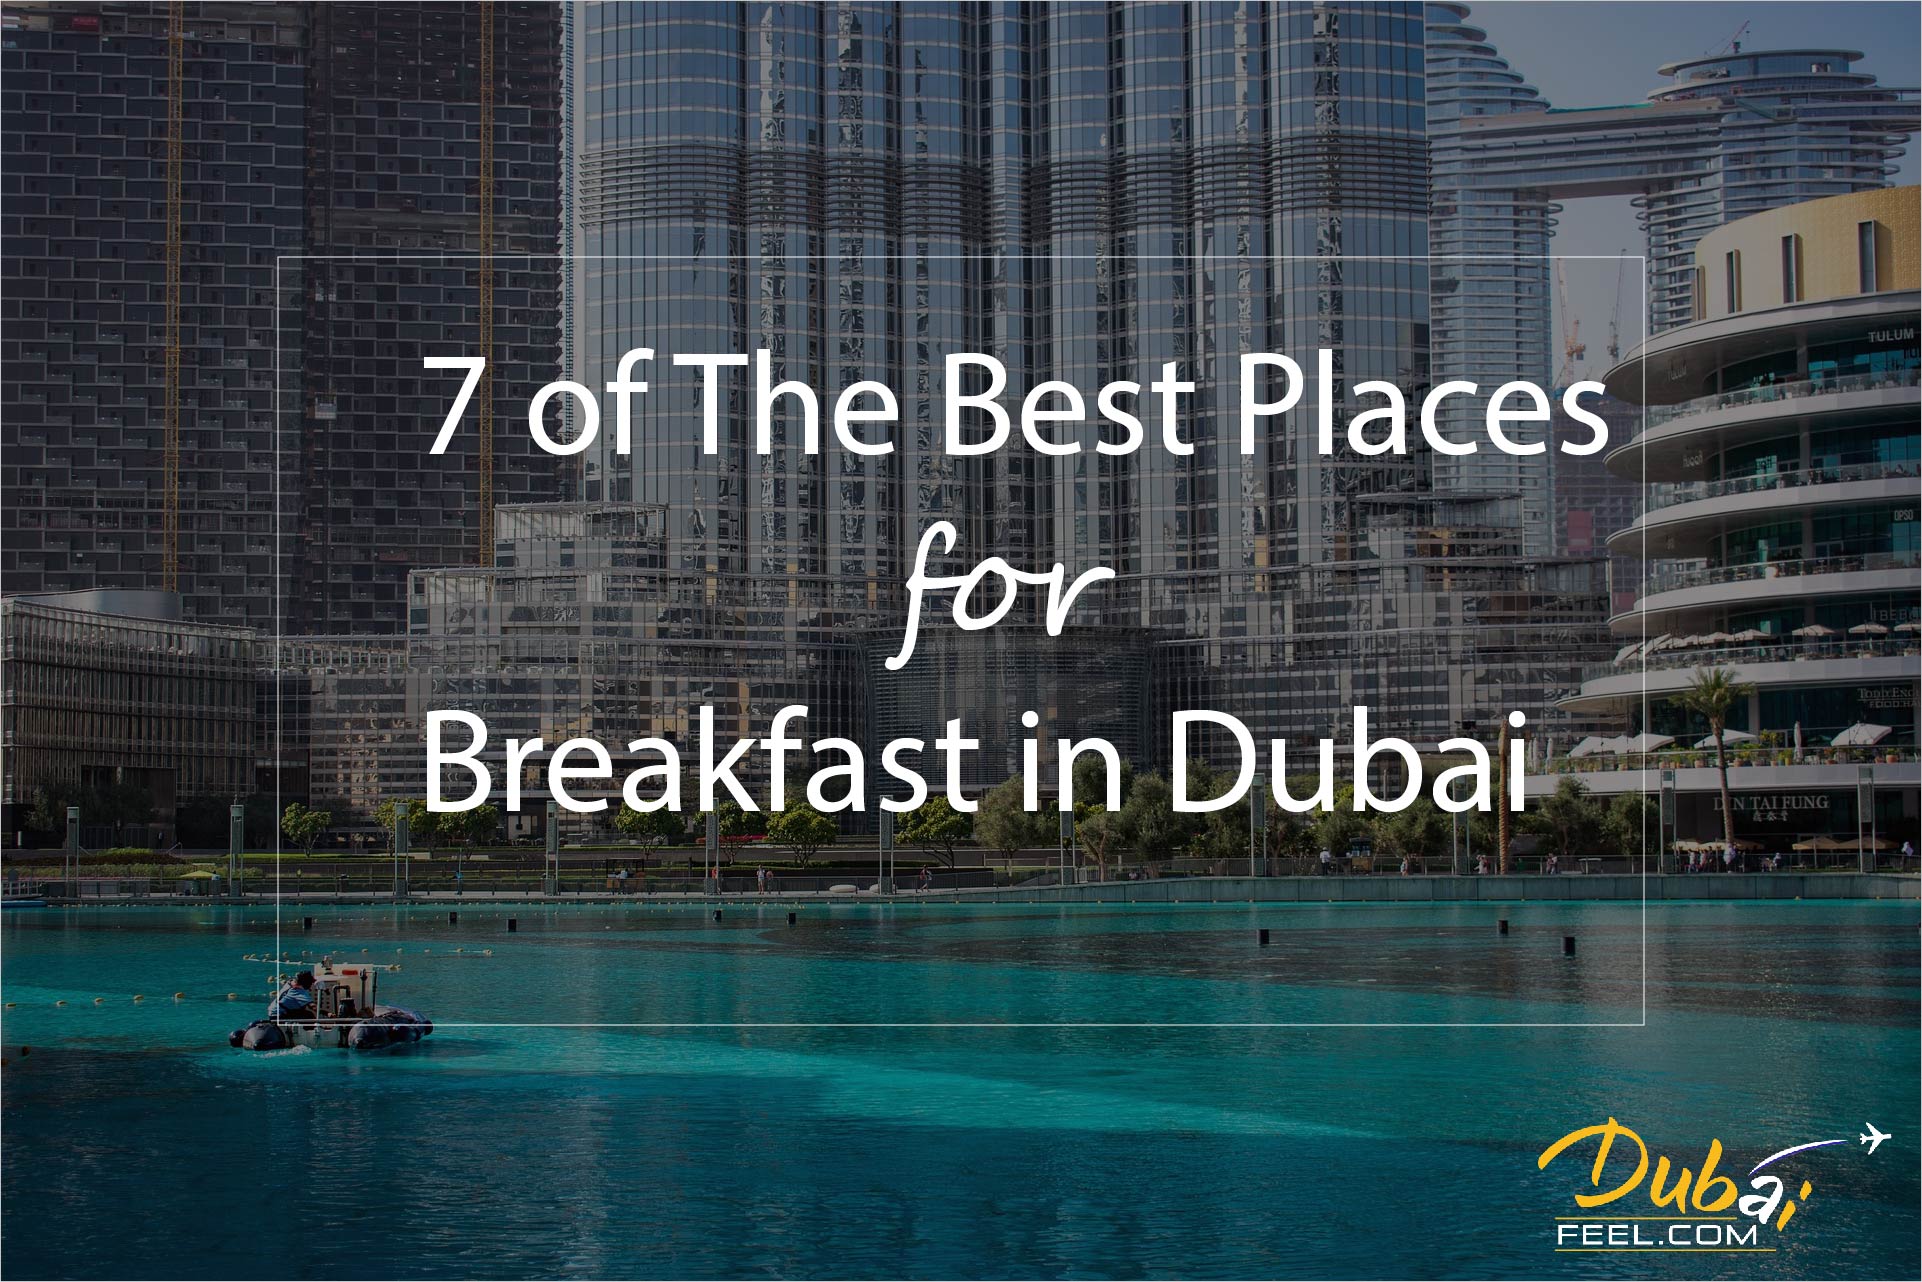 7 of the best places for breakfast in Dubai - Local Dubai Tours